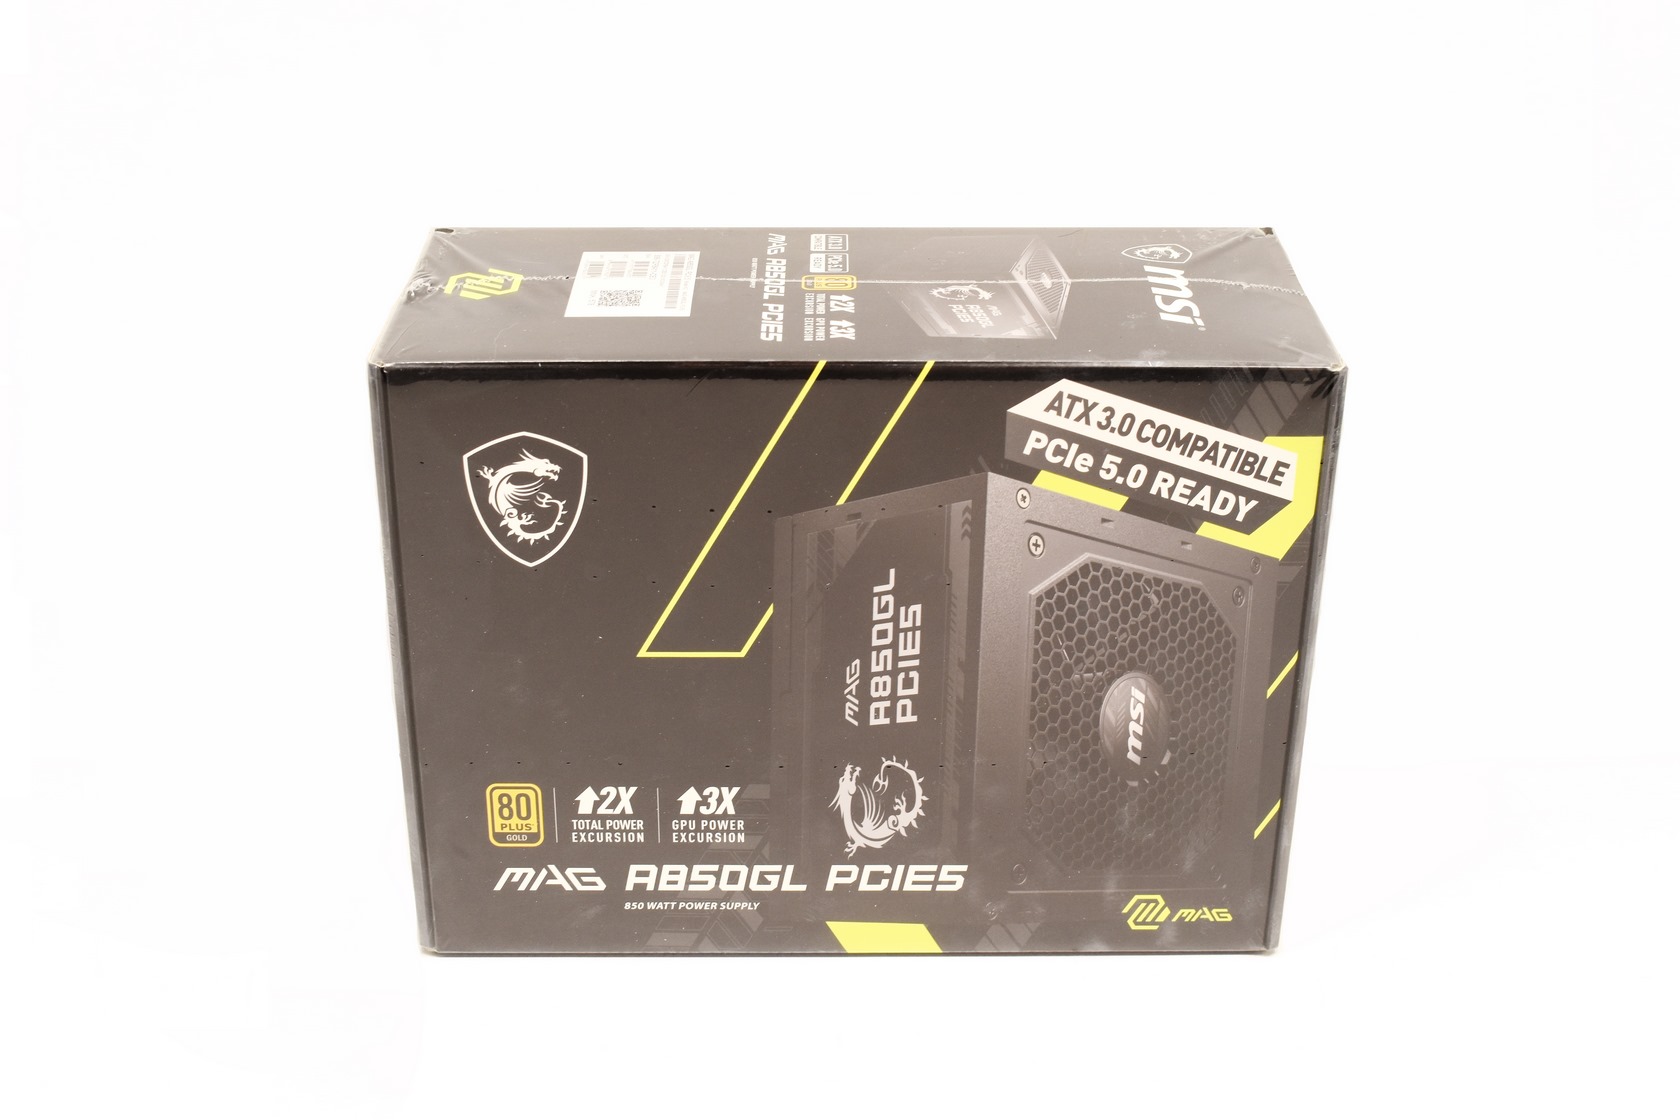 EASY PC - The ideal PSU choice for your PC. MSI MAG Power Supply Unit's  core features include 80 PLUS Bronze certification, DC to DC circuit  design, active PFC, and low-noise fan.